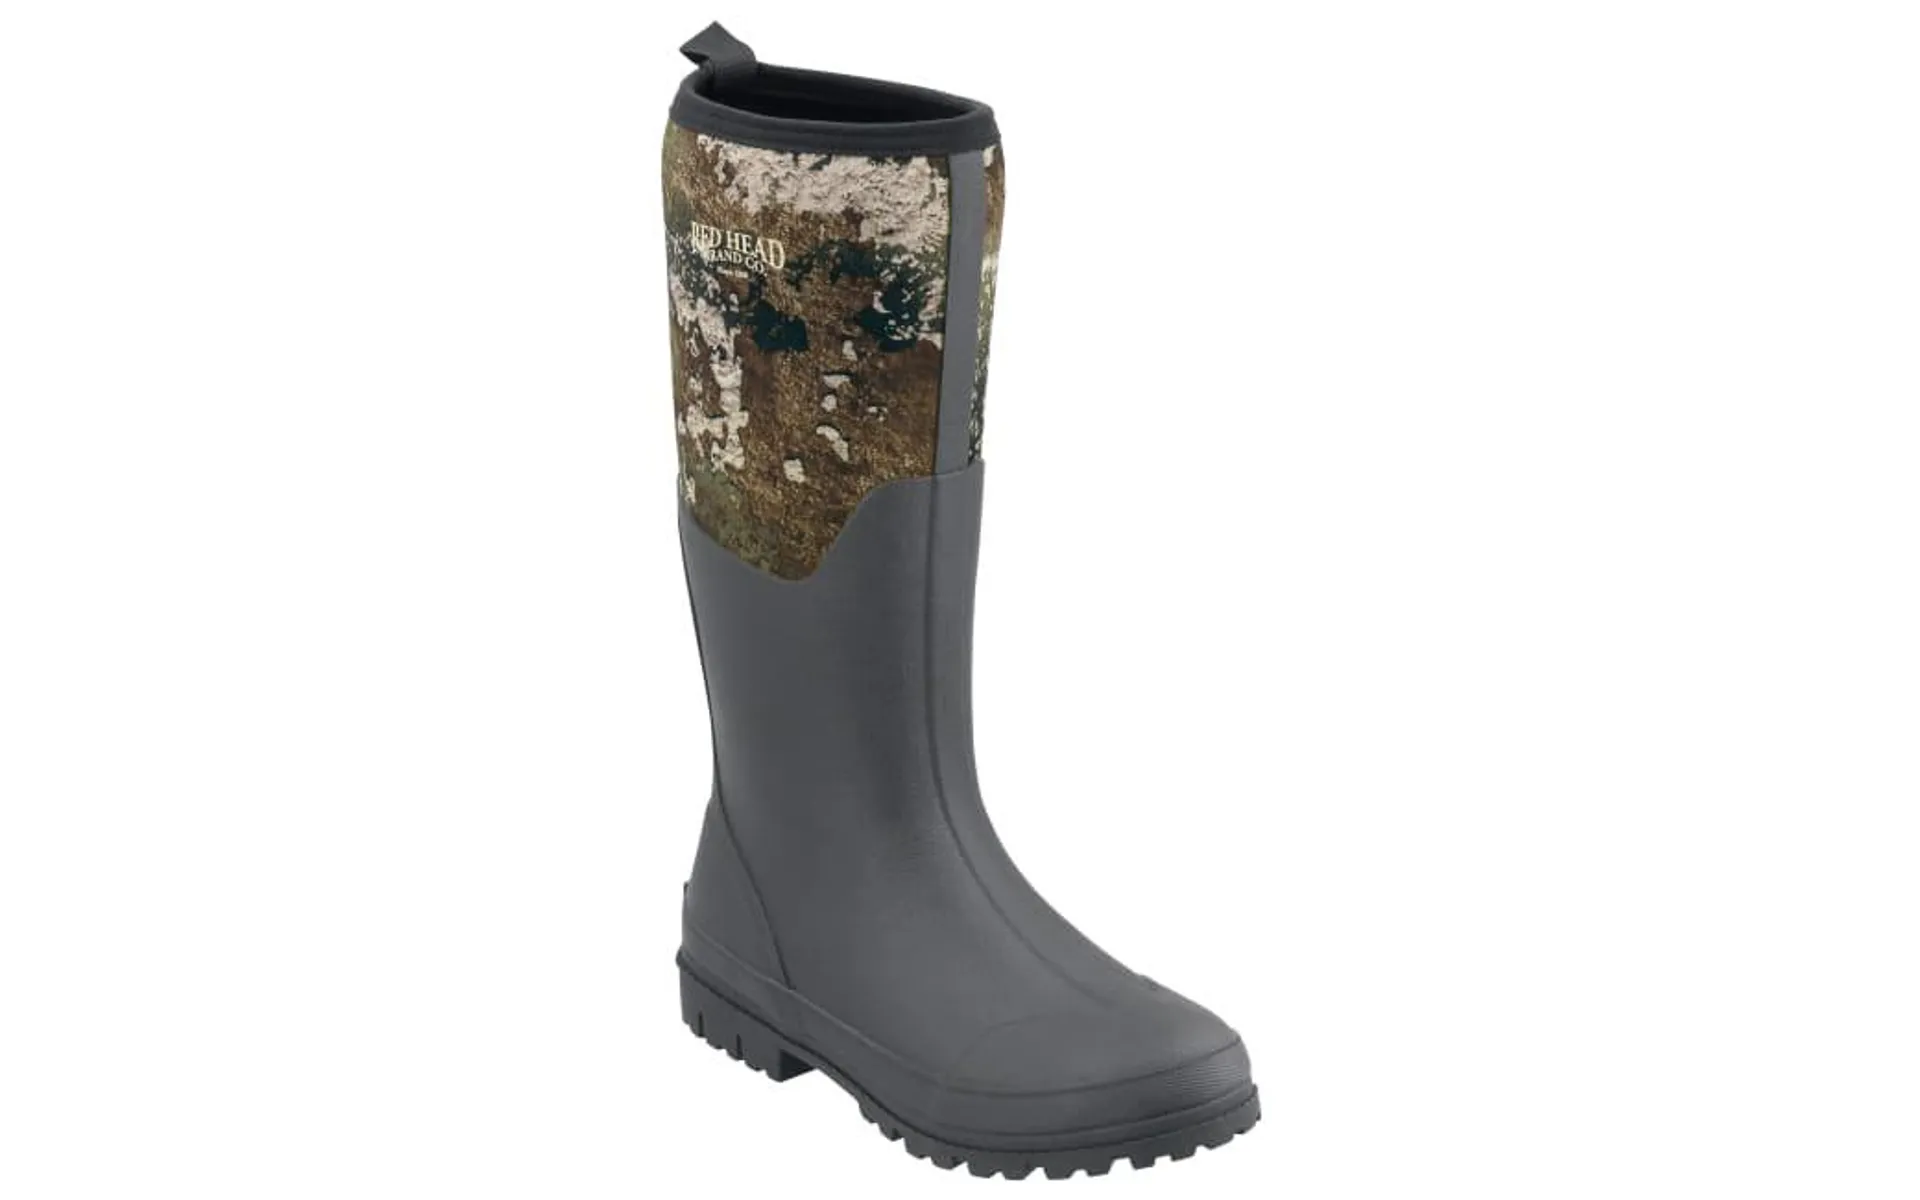 RedHead Camo Utility Waterproof Rubber Boots for Men